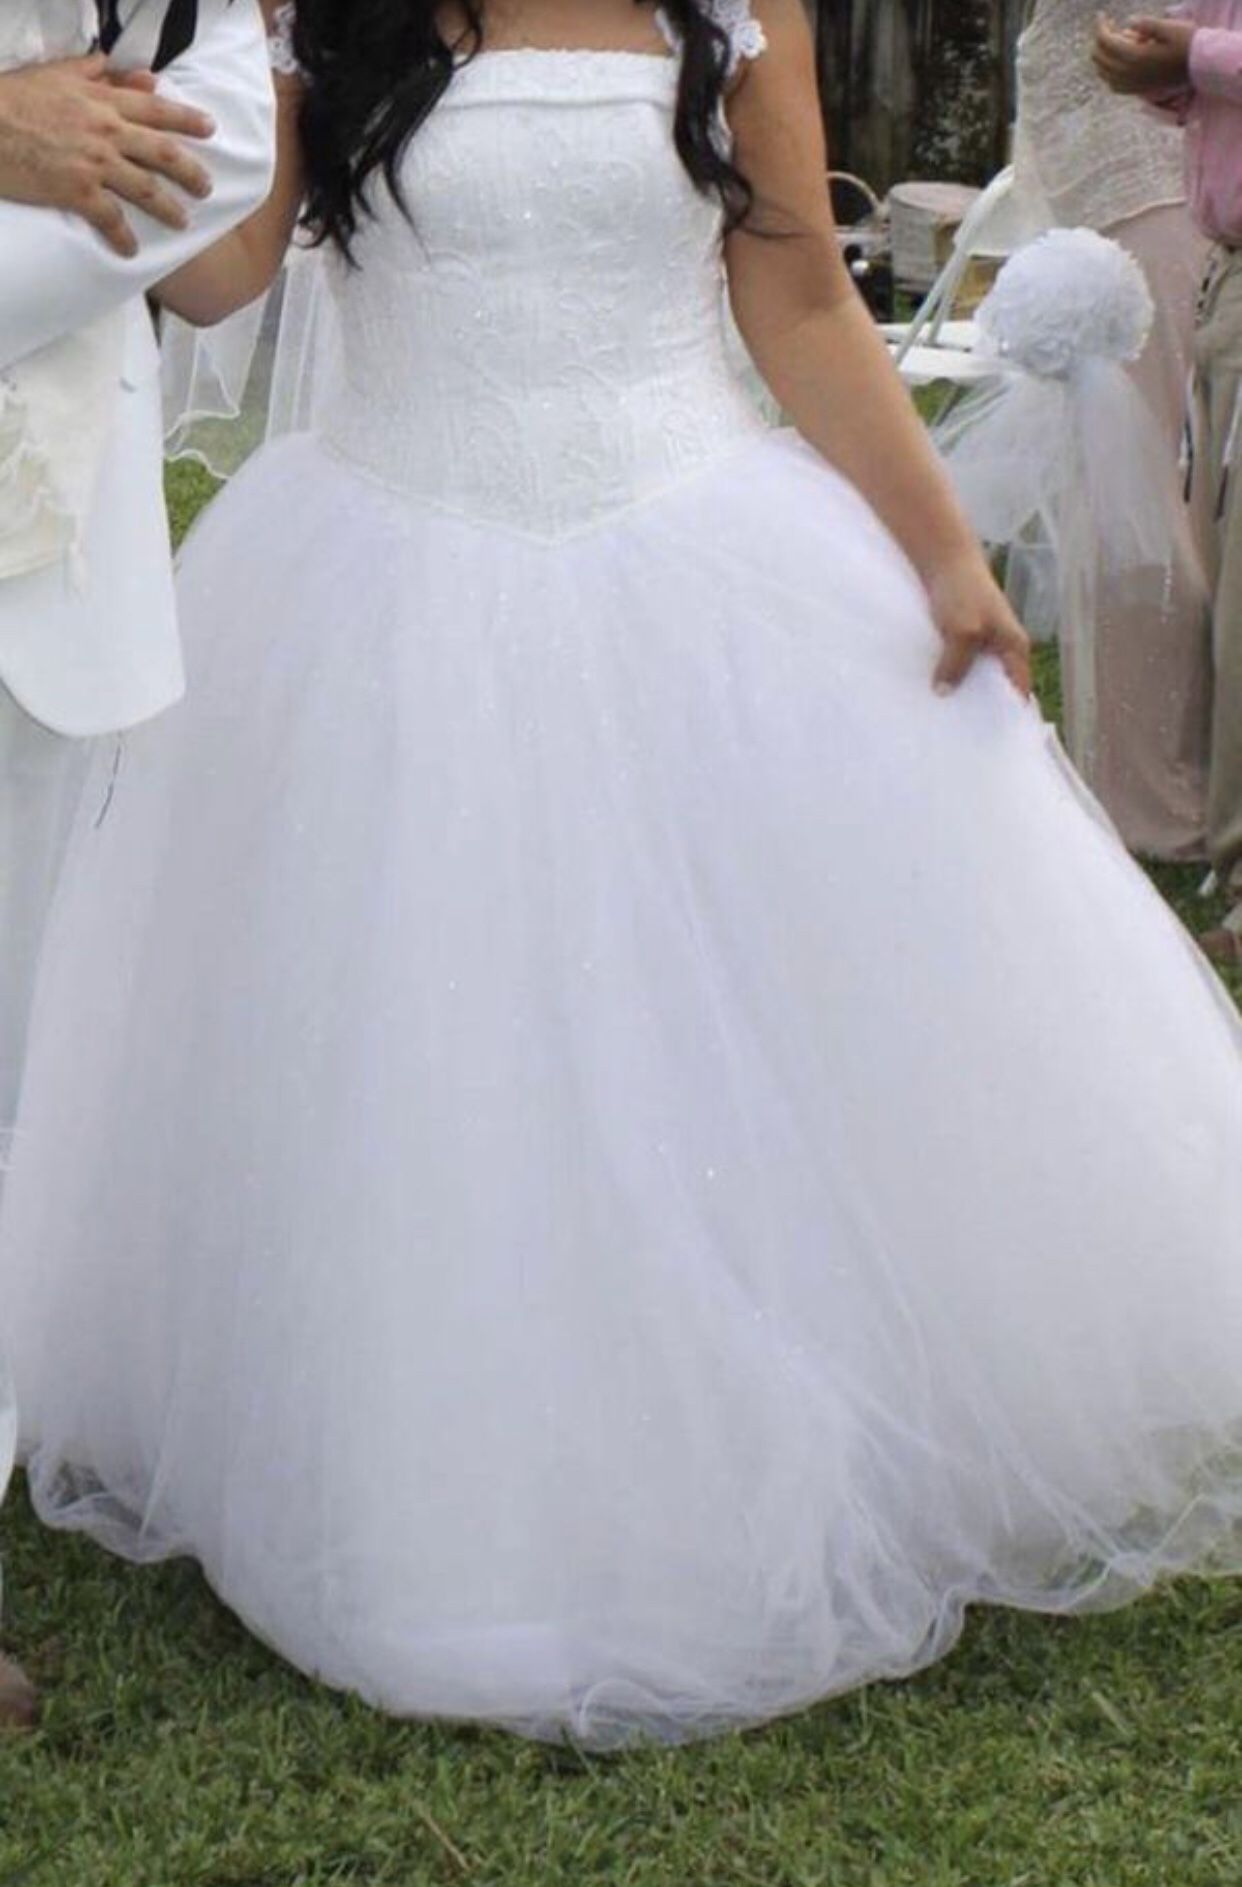 SIZE 14 - Tulle Wedding Dress with Corseted Satin Bodice (David’s Bridal)